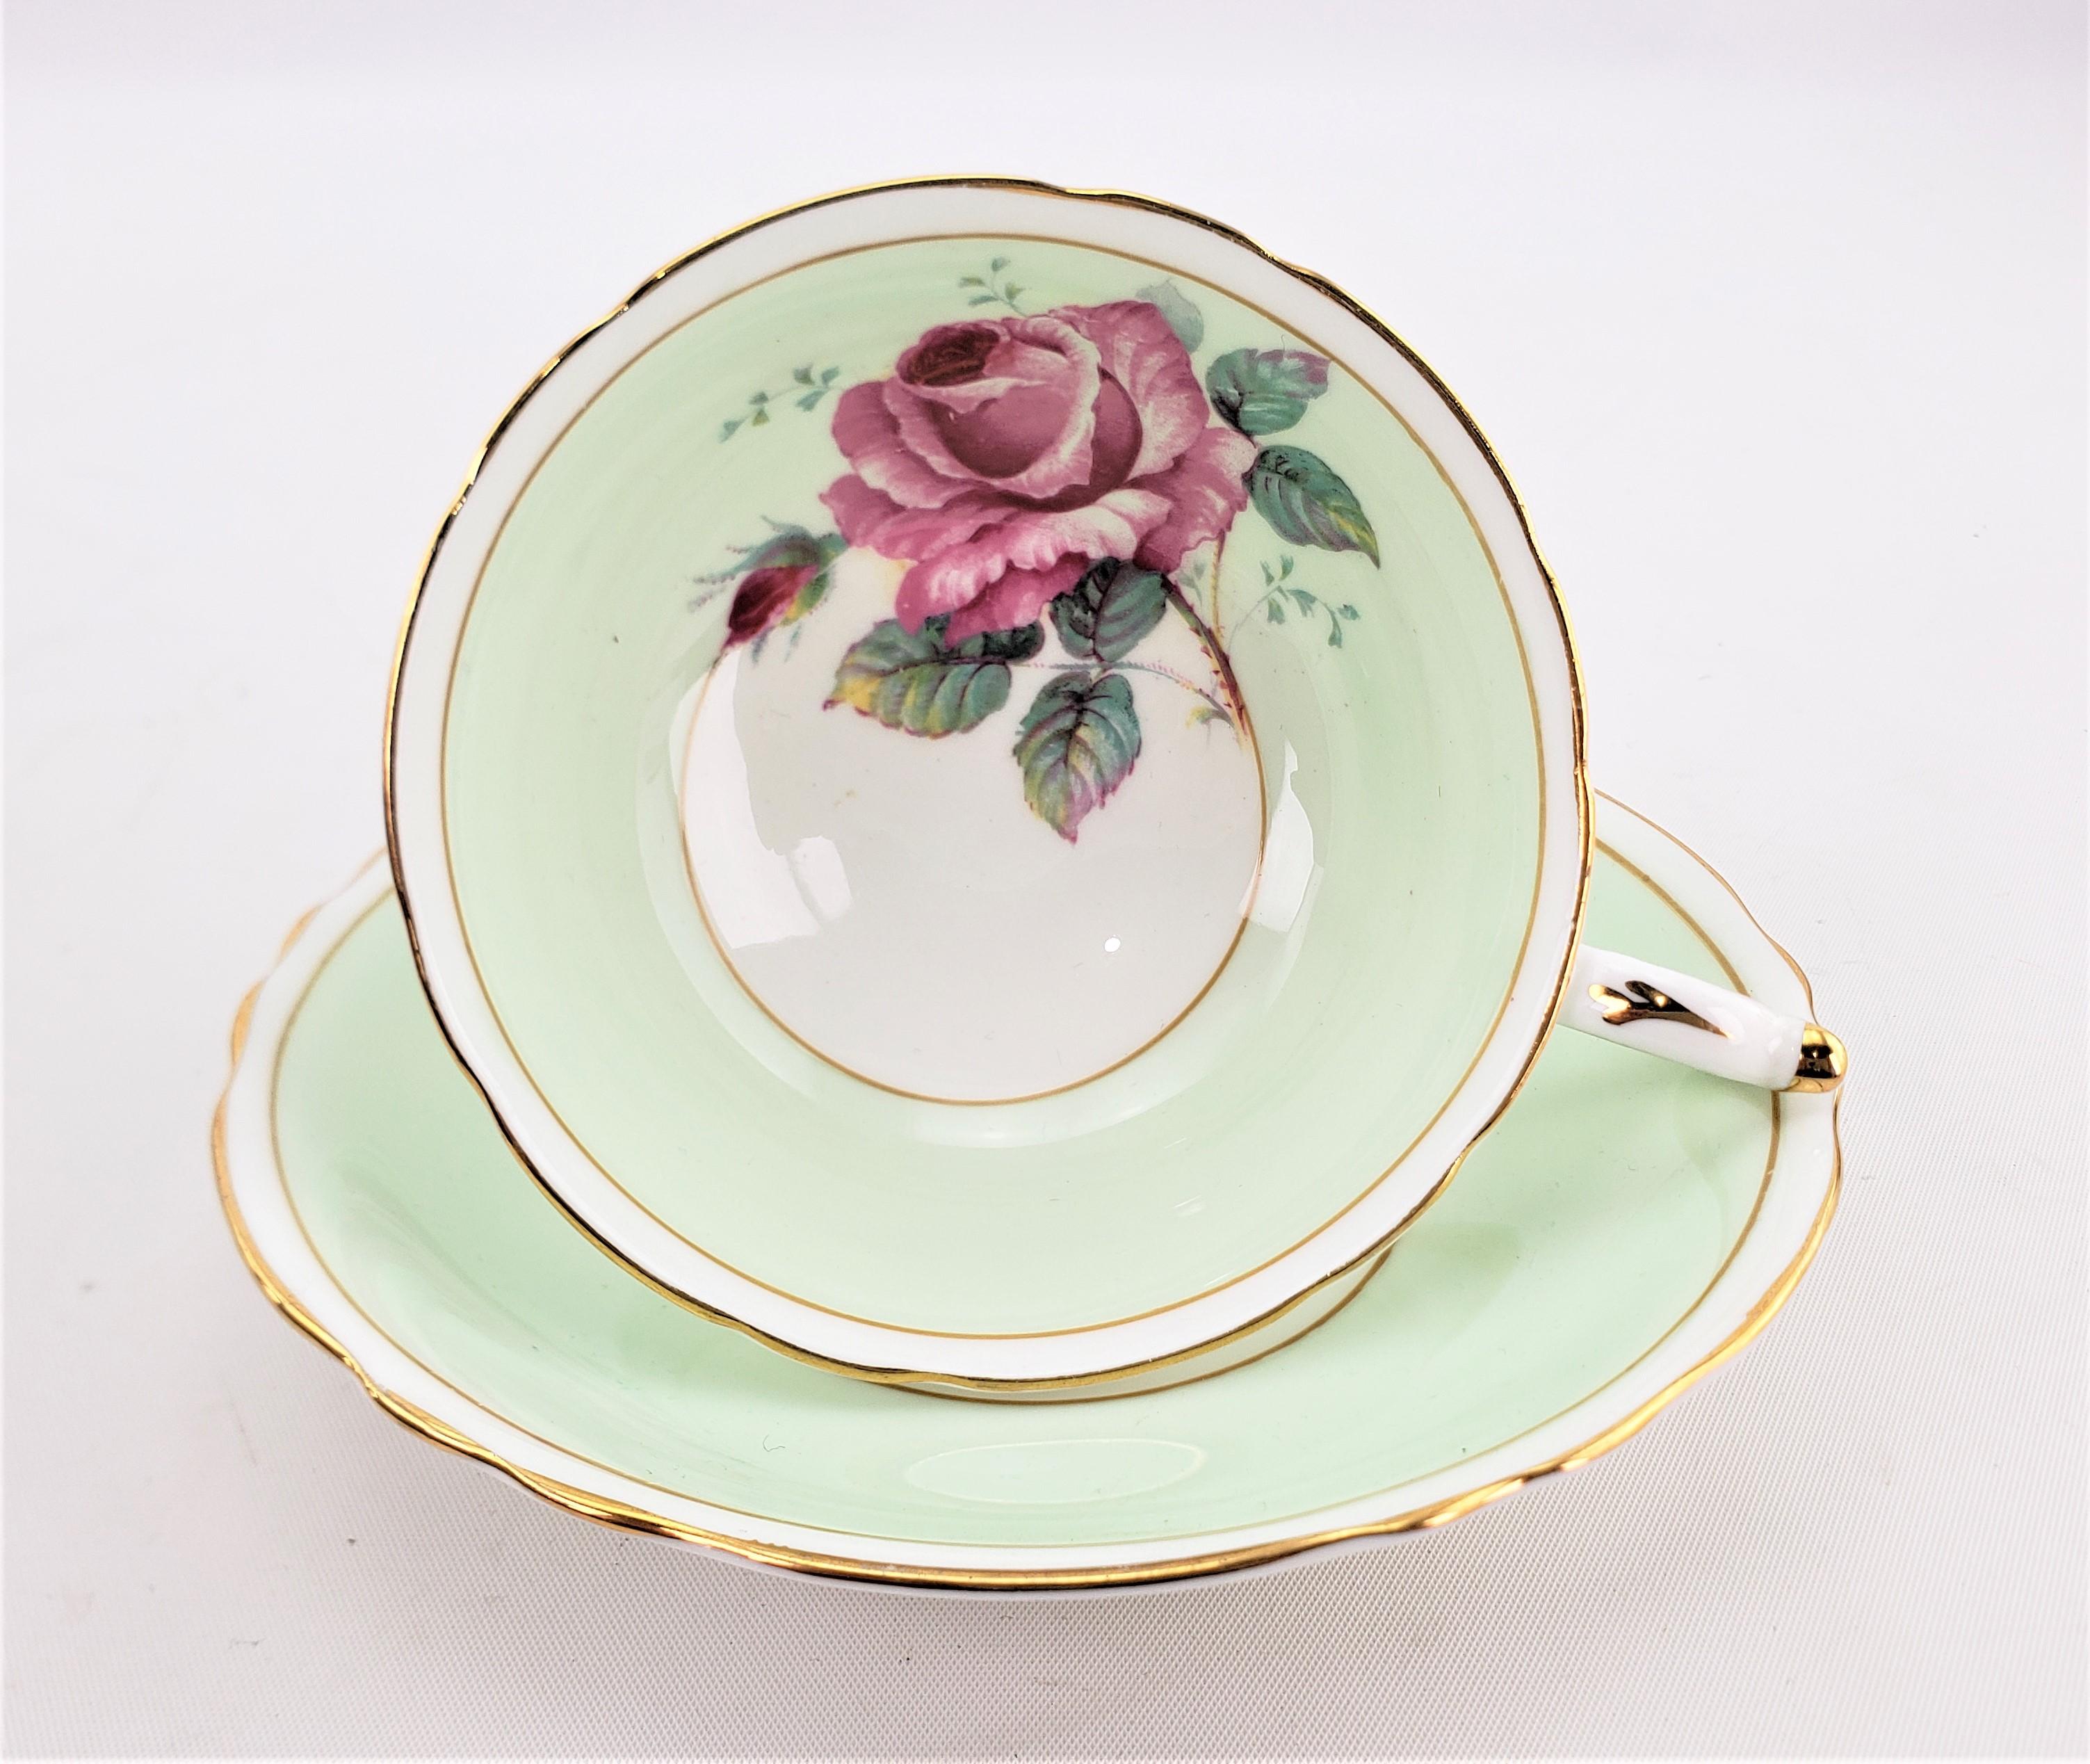 This teacup and saucer set was made by the renowned Paragon fine bone china factory of England in approximately 1960. The set is done with a pastel mint green ground with a large red offset cabbage rose on the inside of the cup which is replicated